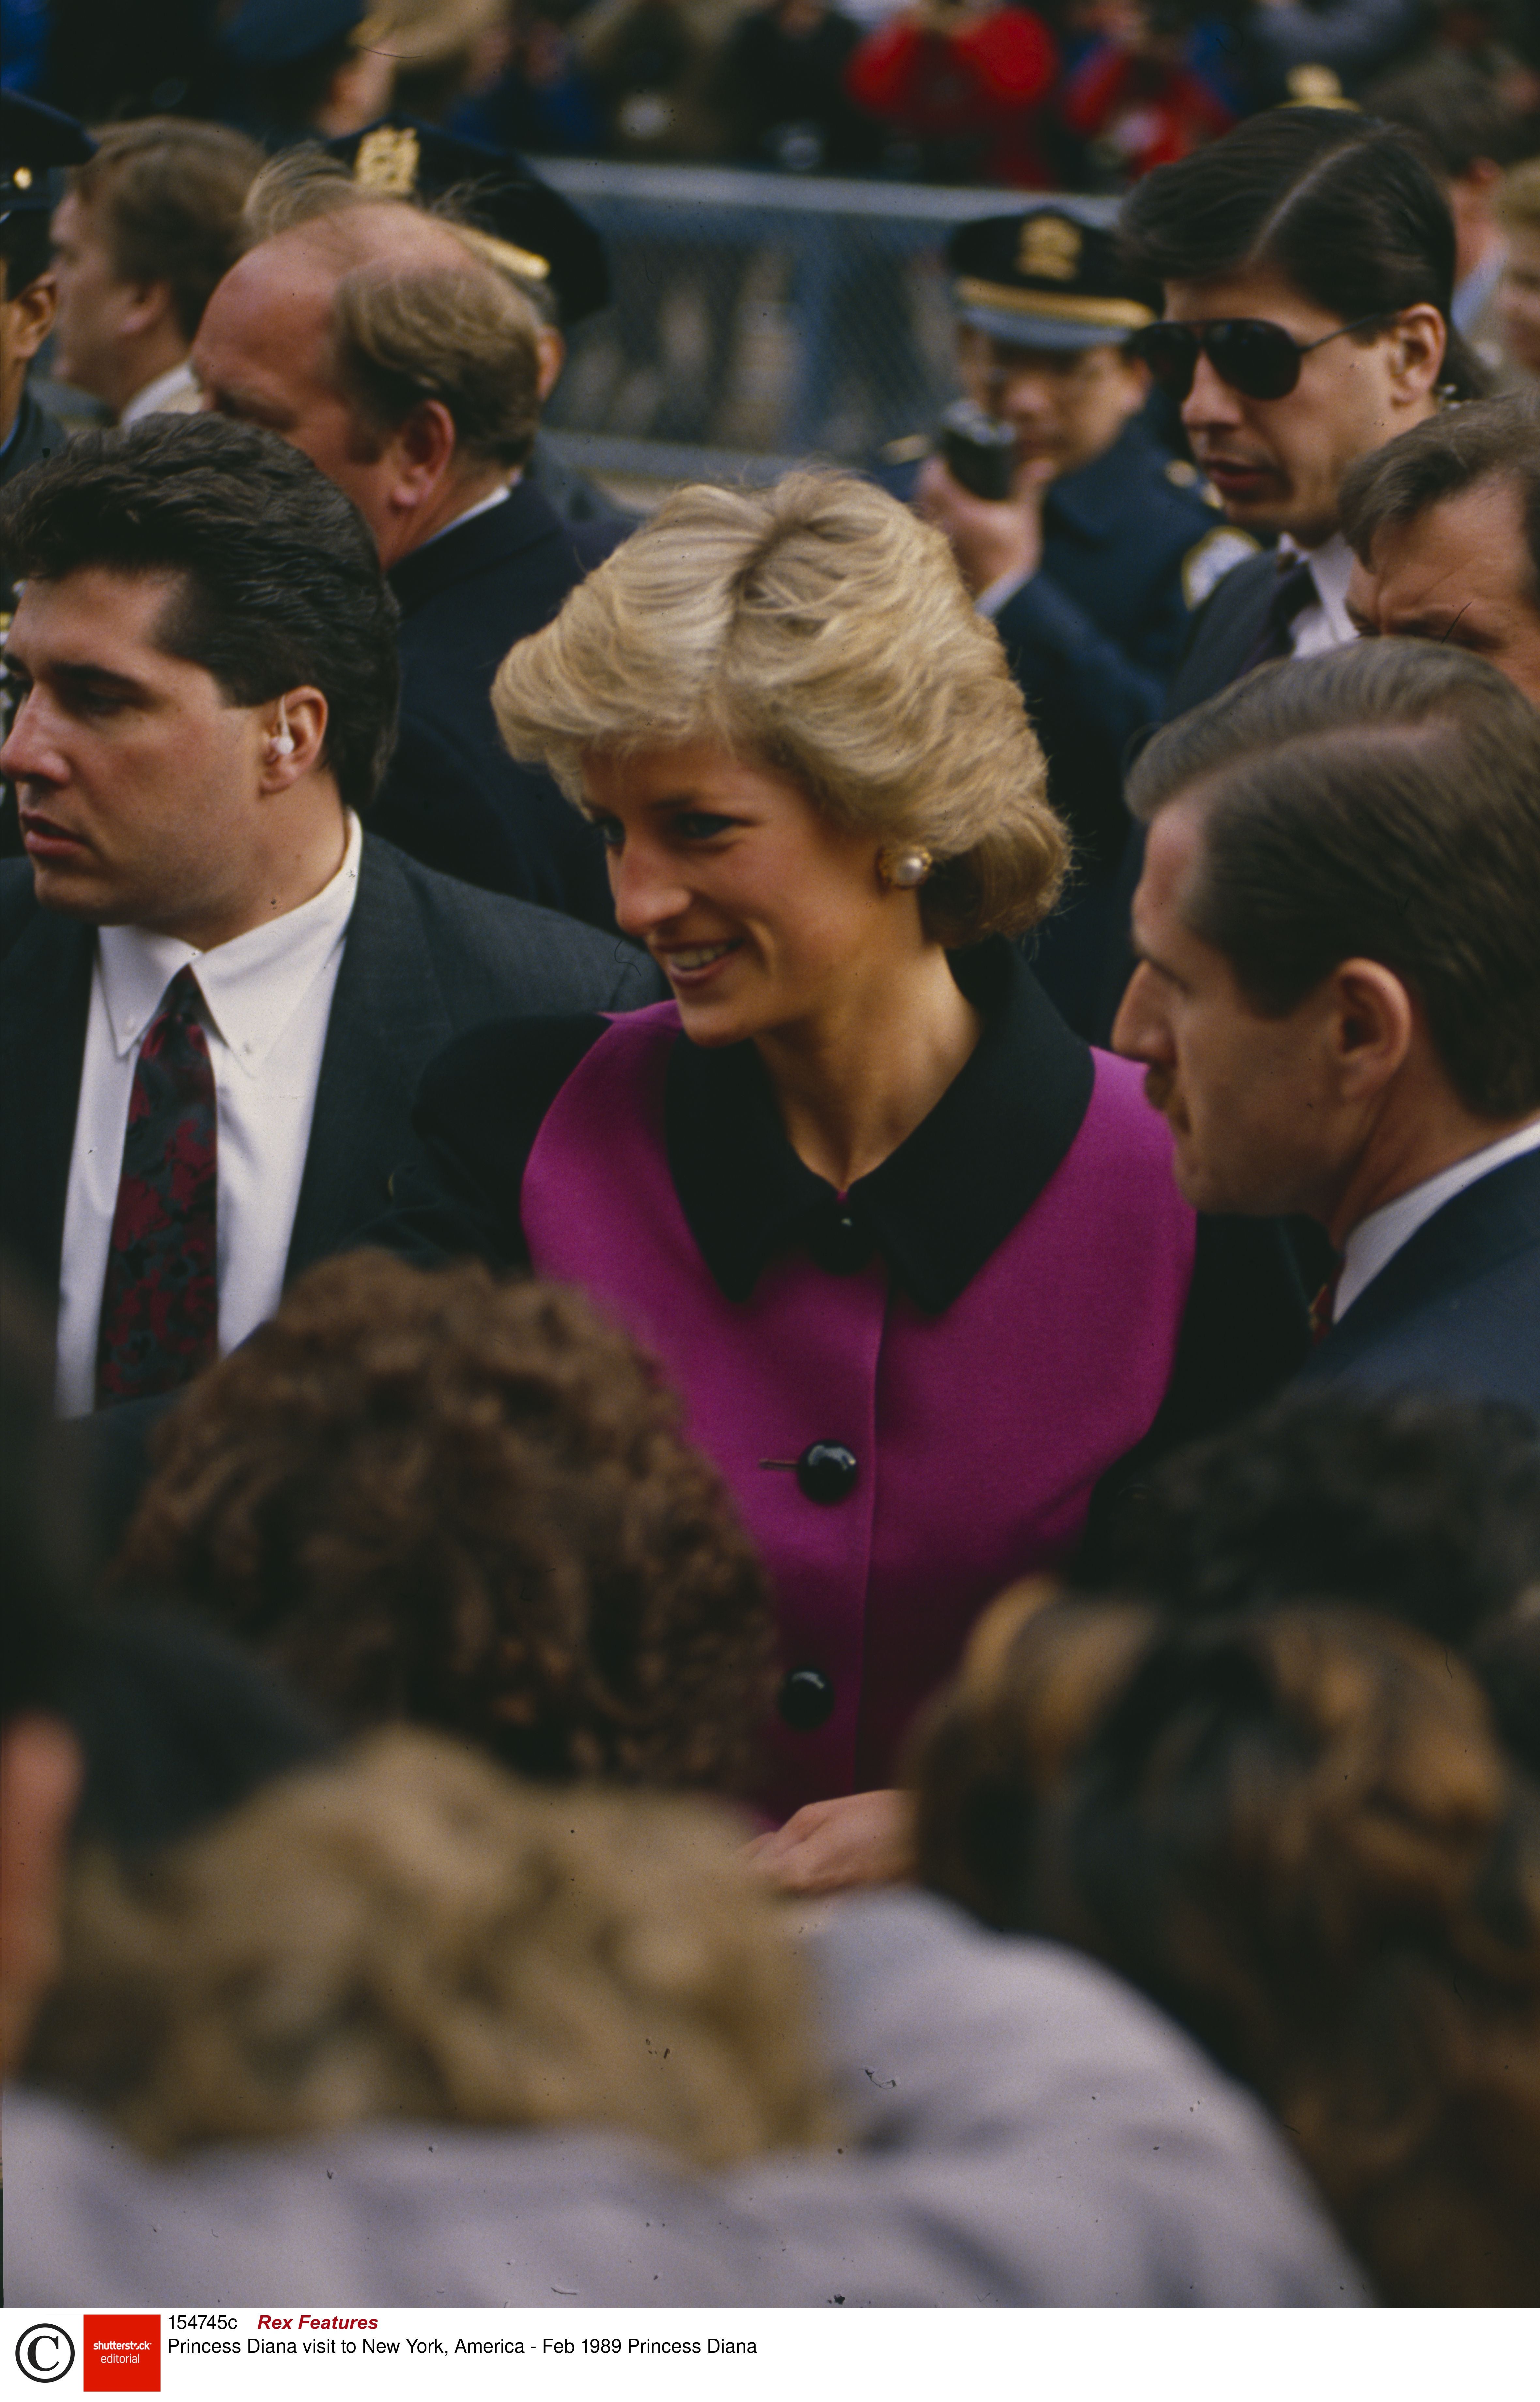 Princess Diana was met with crowds of fans during visit to New York